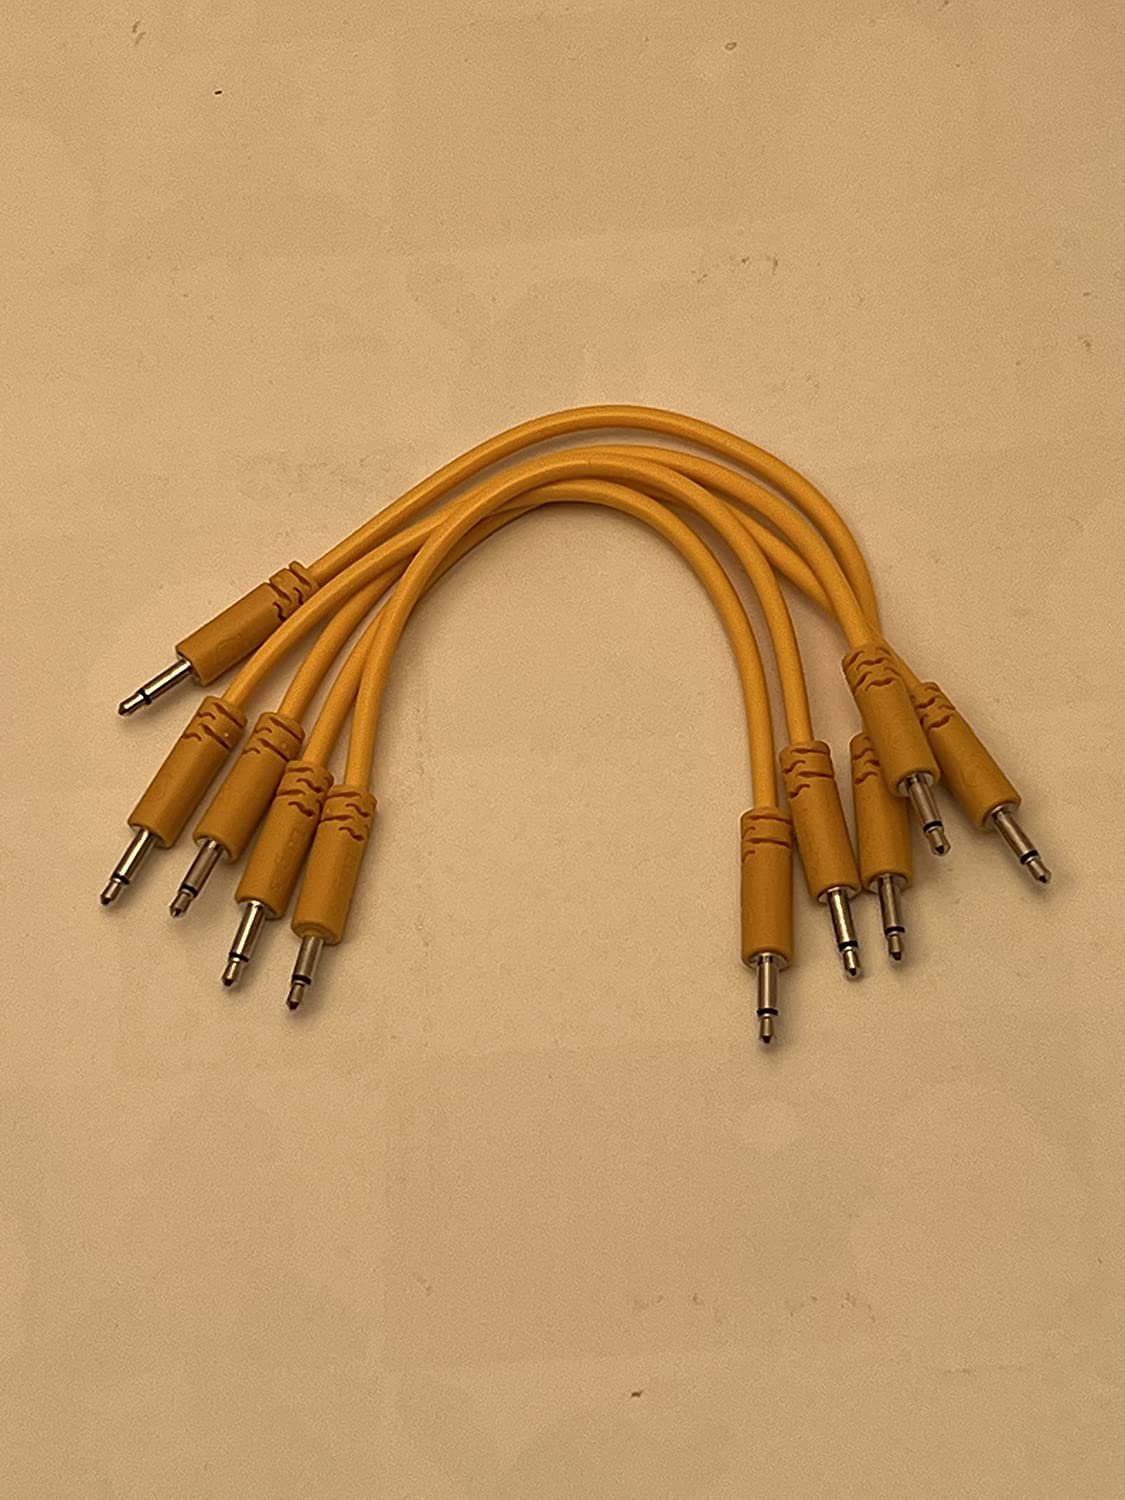 Luigi's Modular Supply Spaghetti Eurorack Patch Cables - Package of 5 Gold/Orange Cables, 6" (15 cm)